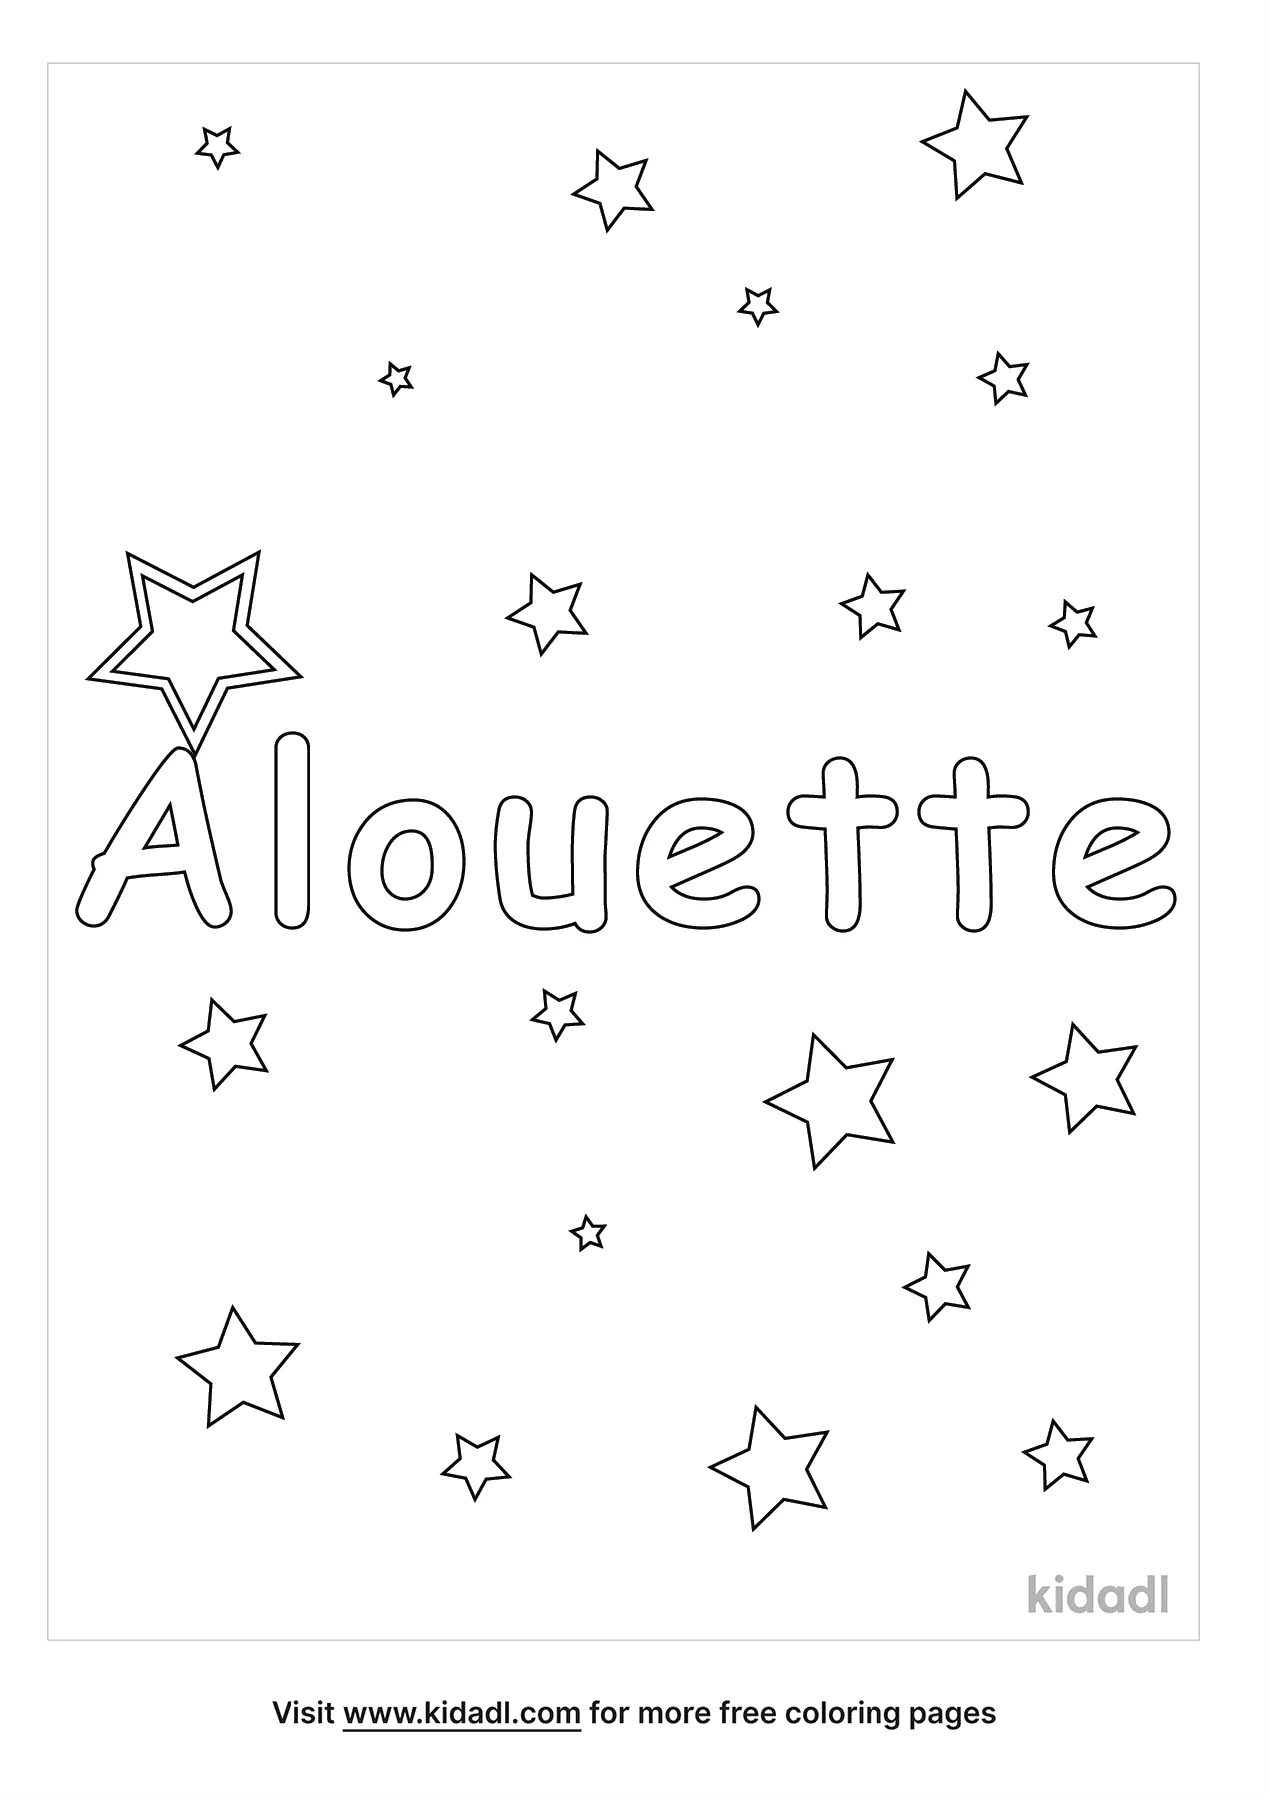 The Name Alouette Coloring Page